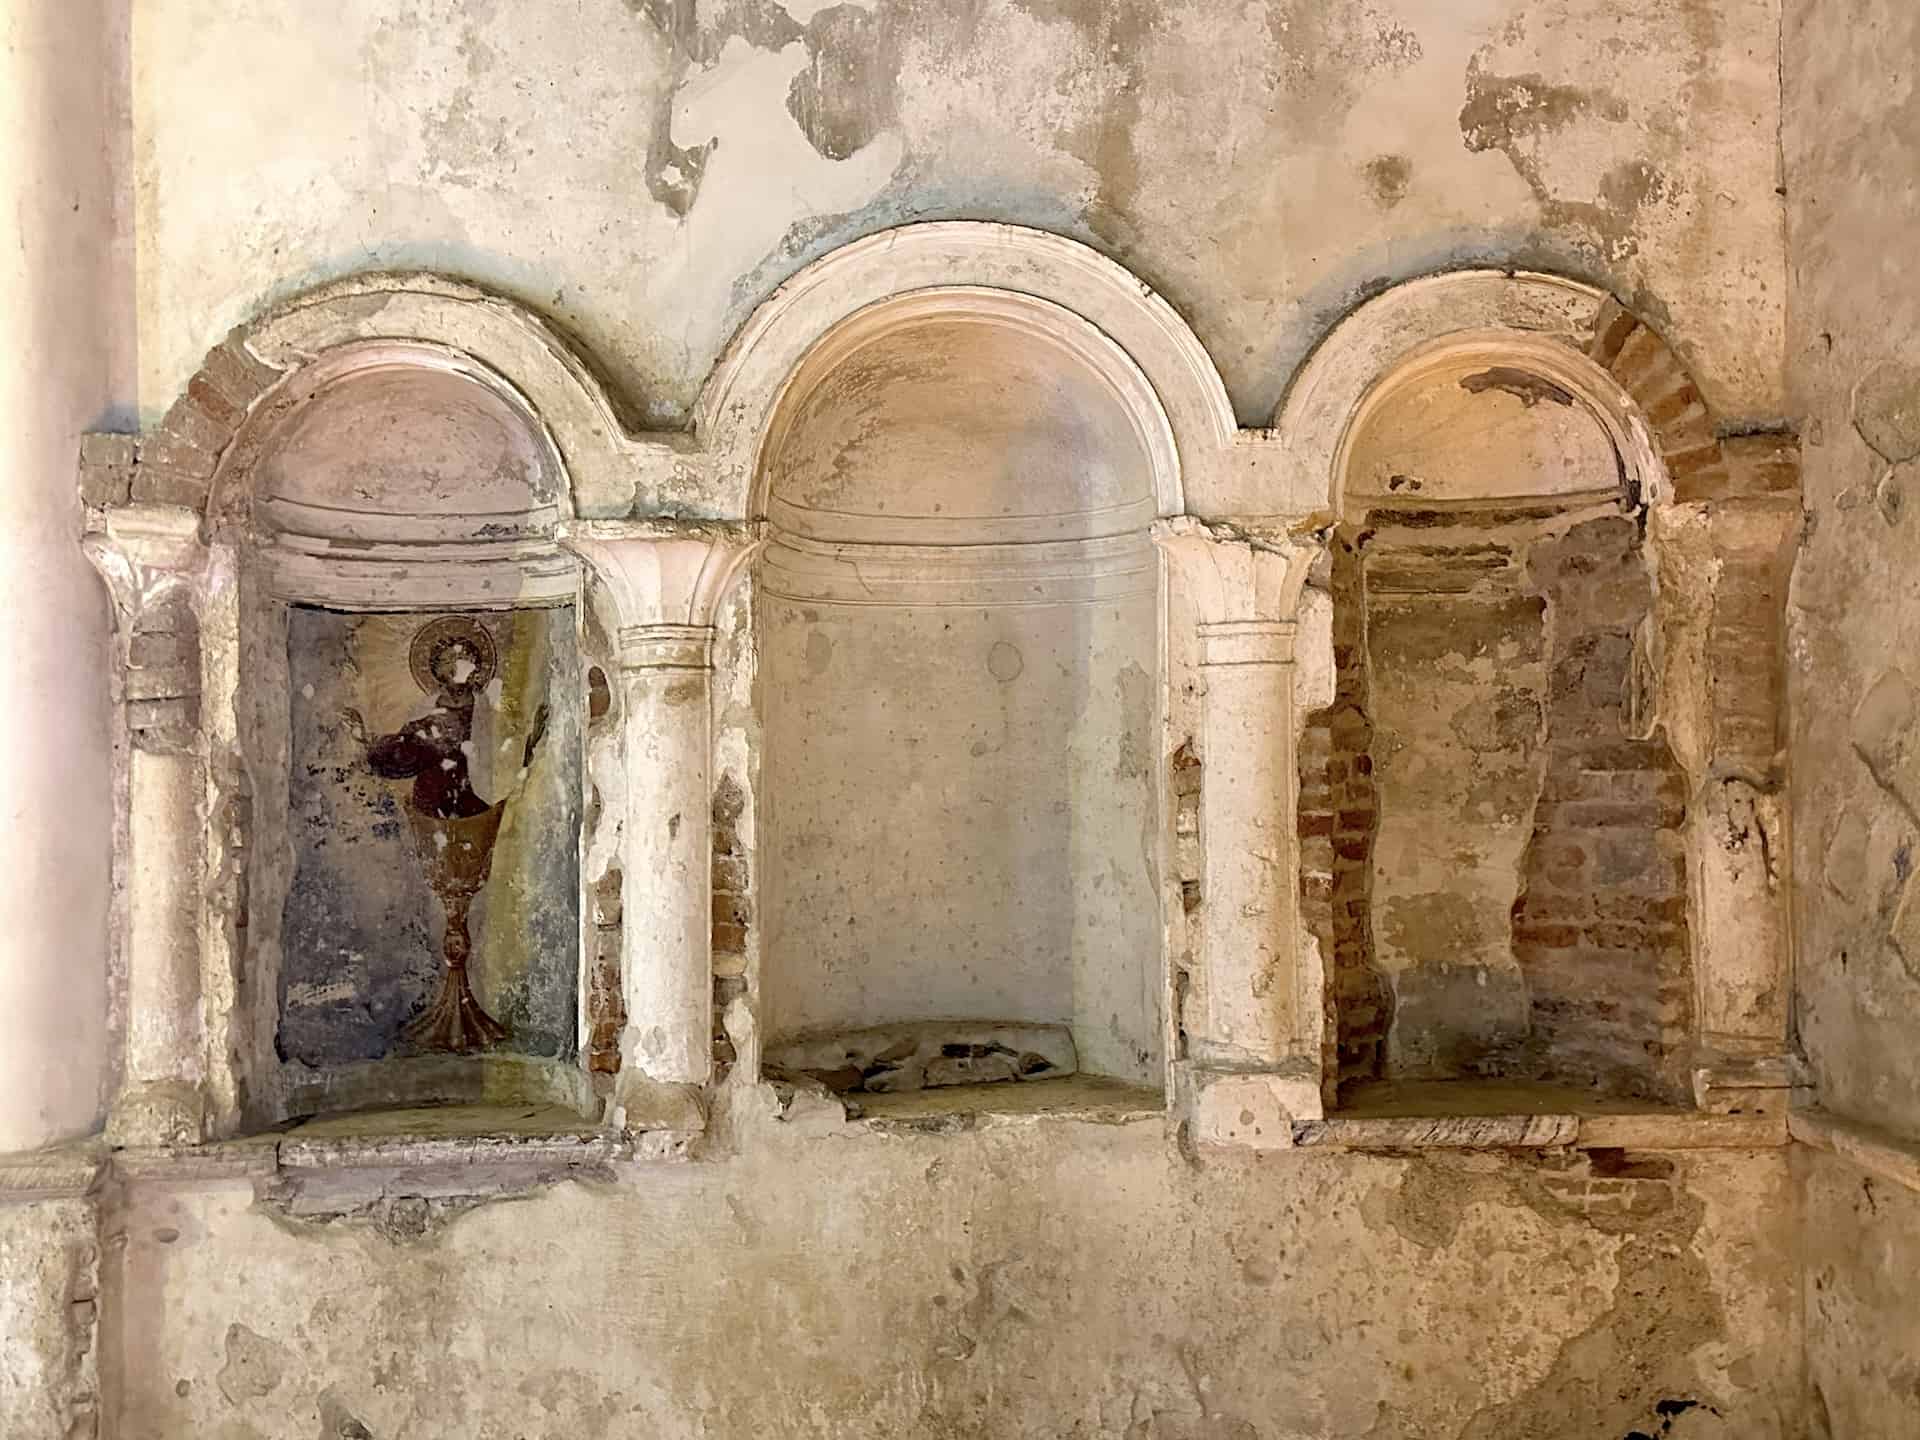 Southeast niches at the Church of St. John the Baptist